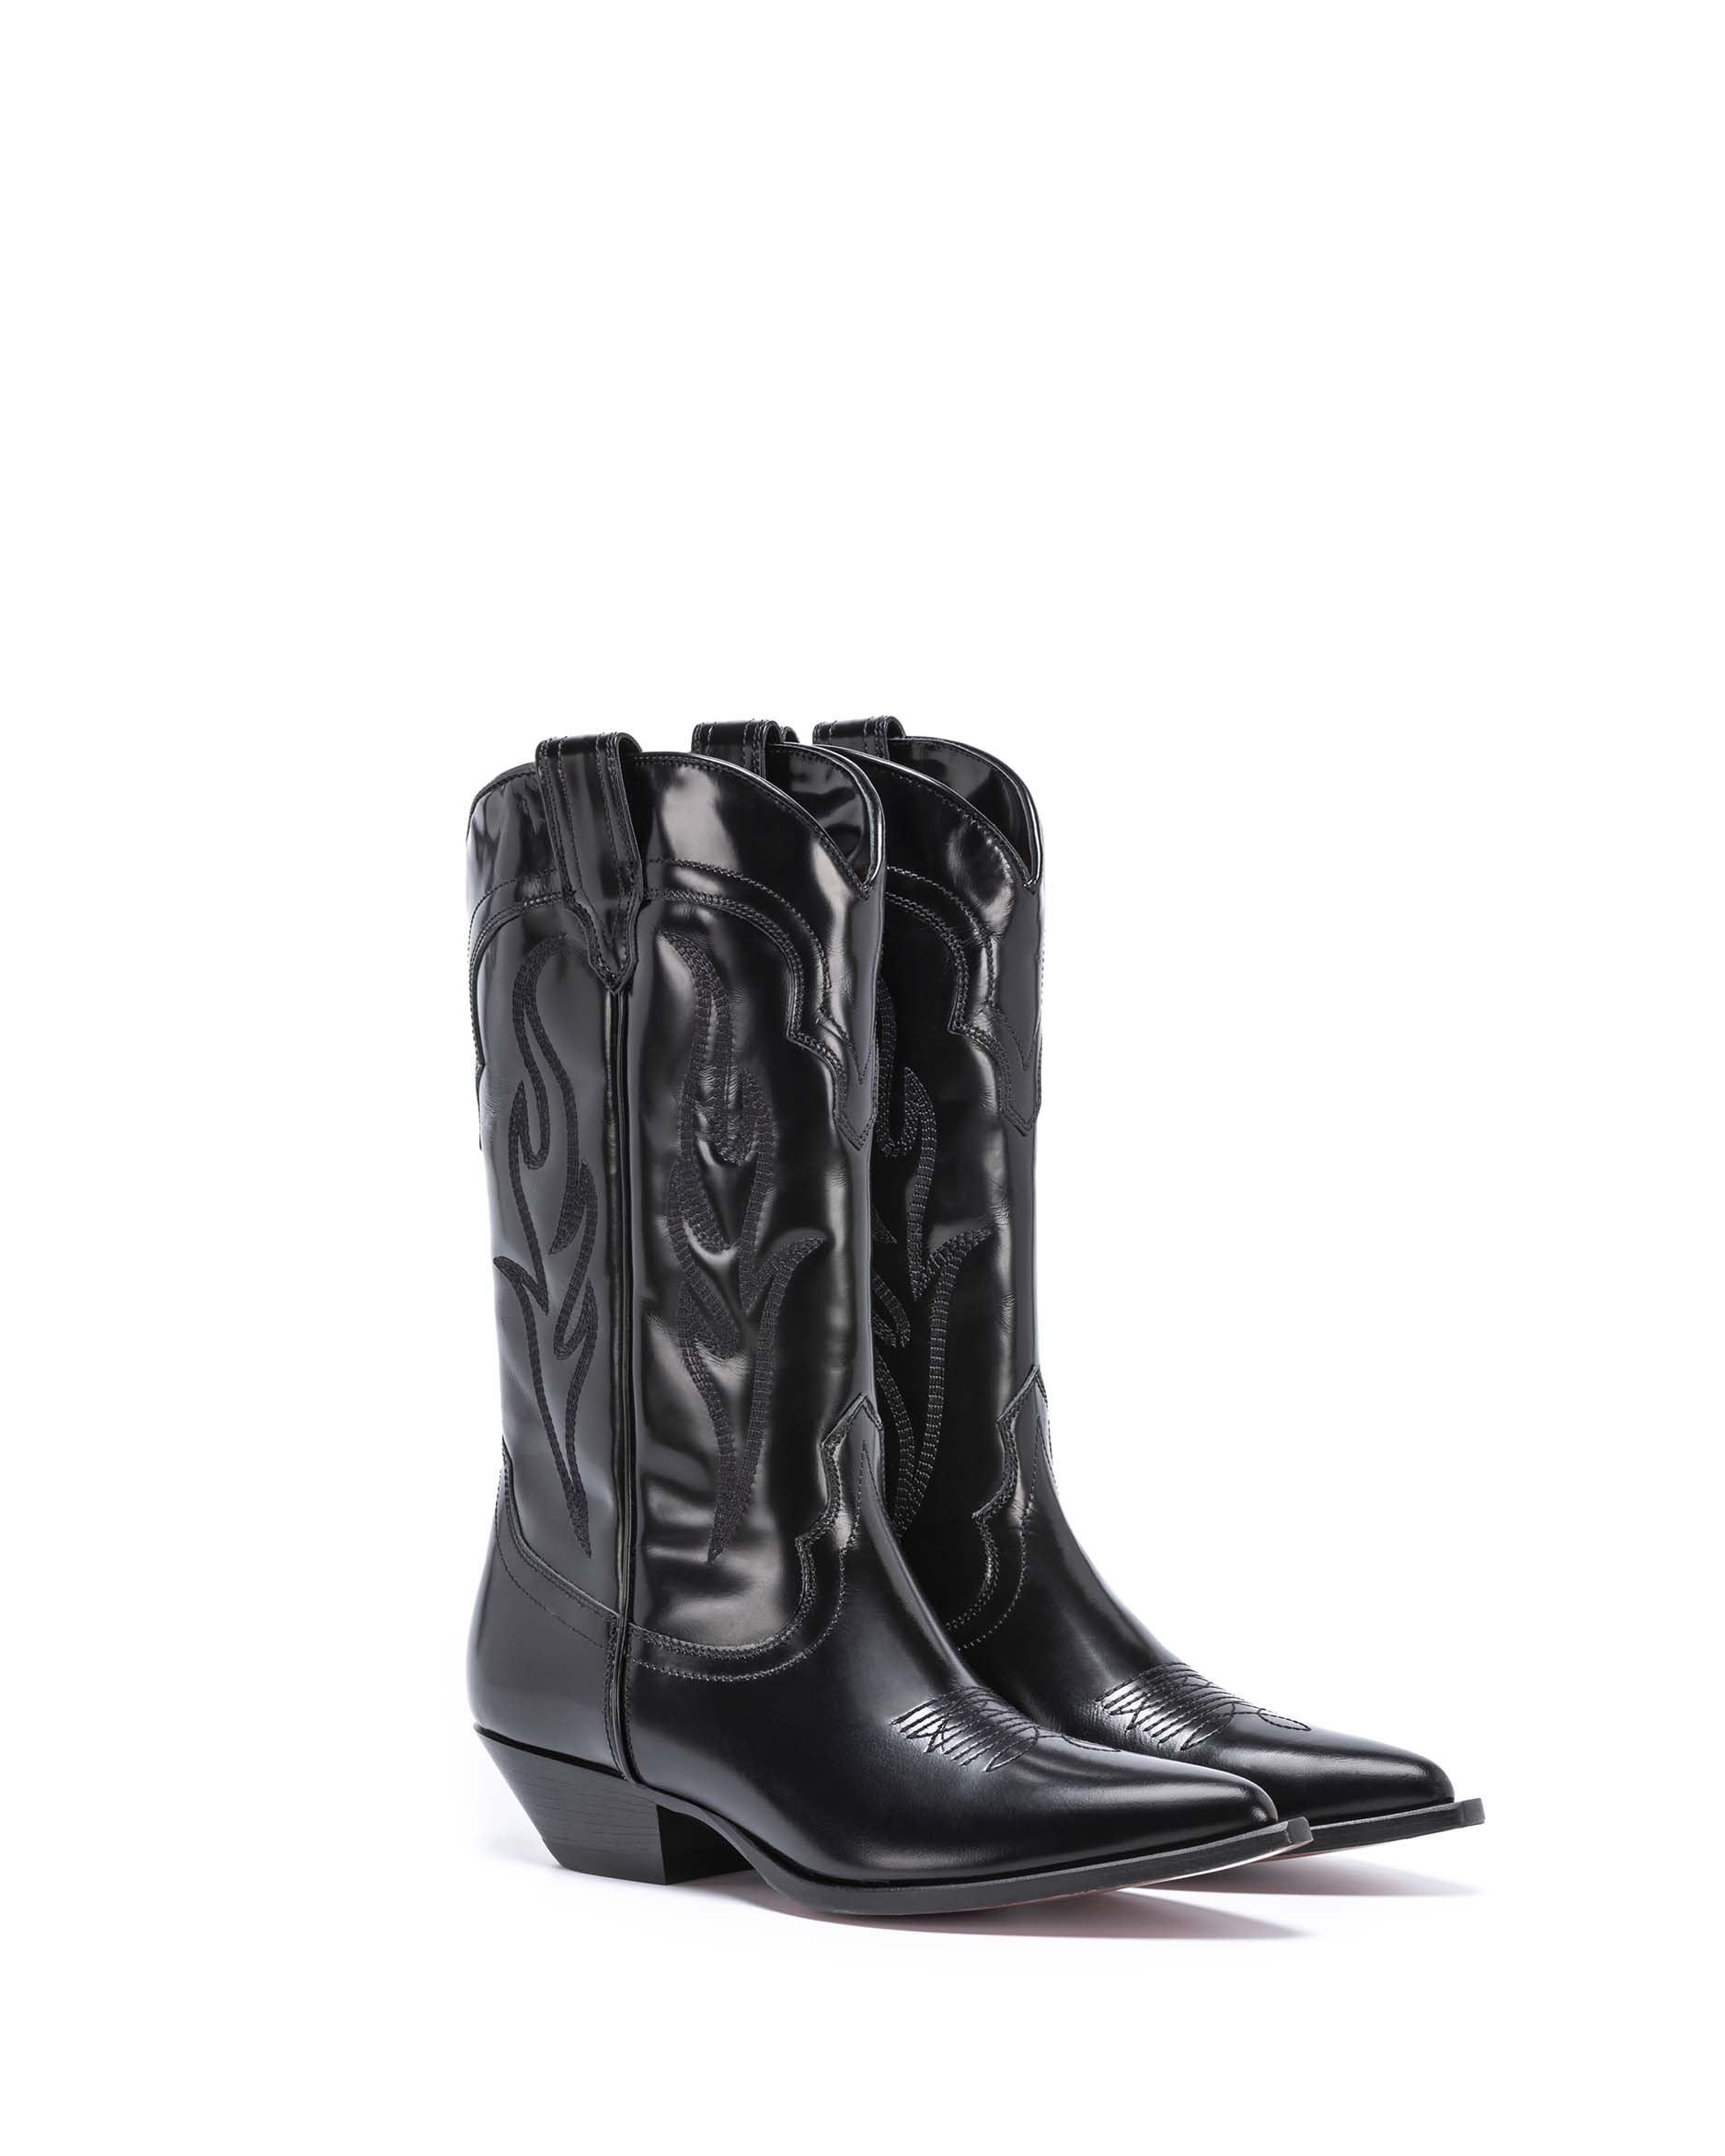 SANTA FE Men's Cowboy Boots in Black Brushed Calfskin | On Tone Embroidery_Front_01